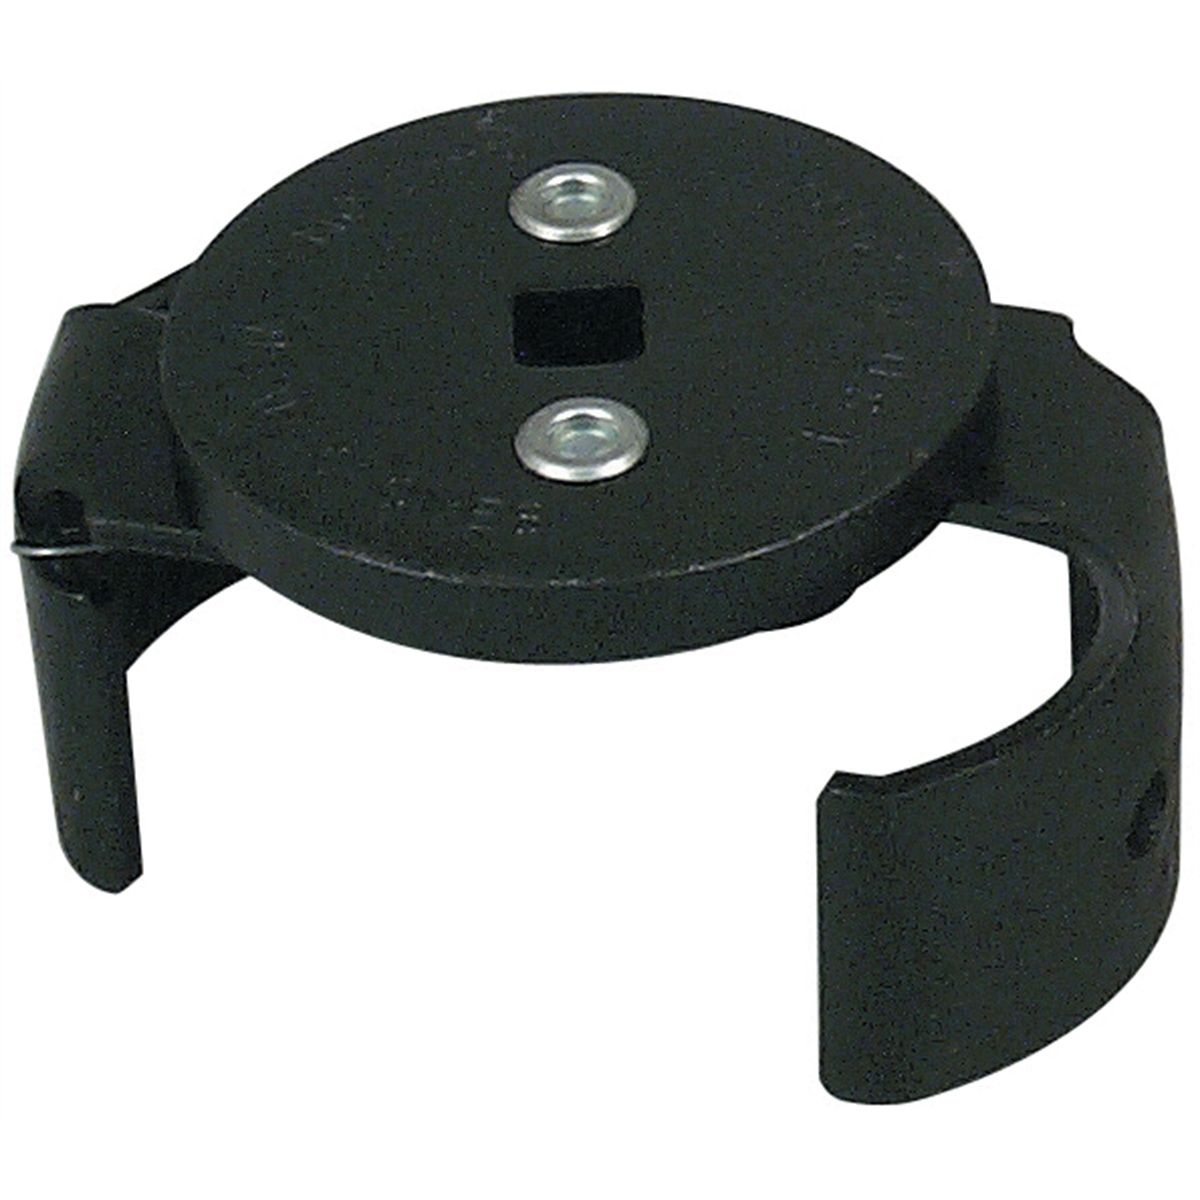 Wide Range Oil Filter Wrench - 3-1/8 In to 3-7/8 In